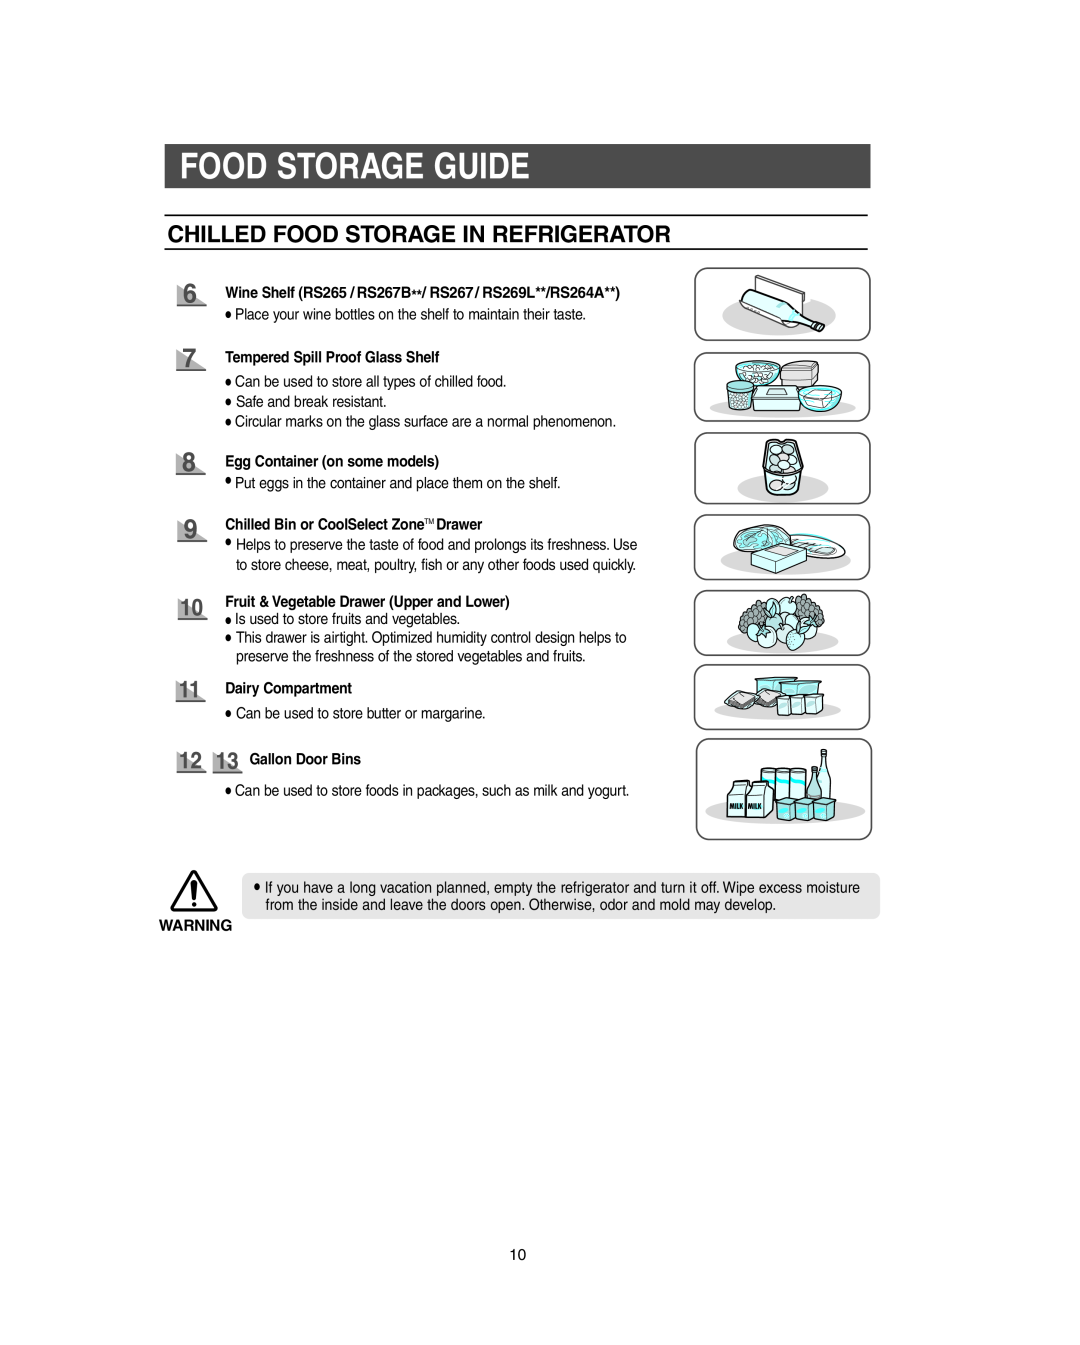 Samsung RS267LBSH Chilled Food Storage In Refrigerator, Tempered Spill Proof Glass Shelf, Egg Container on some models 